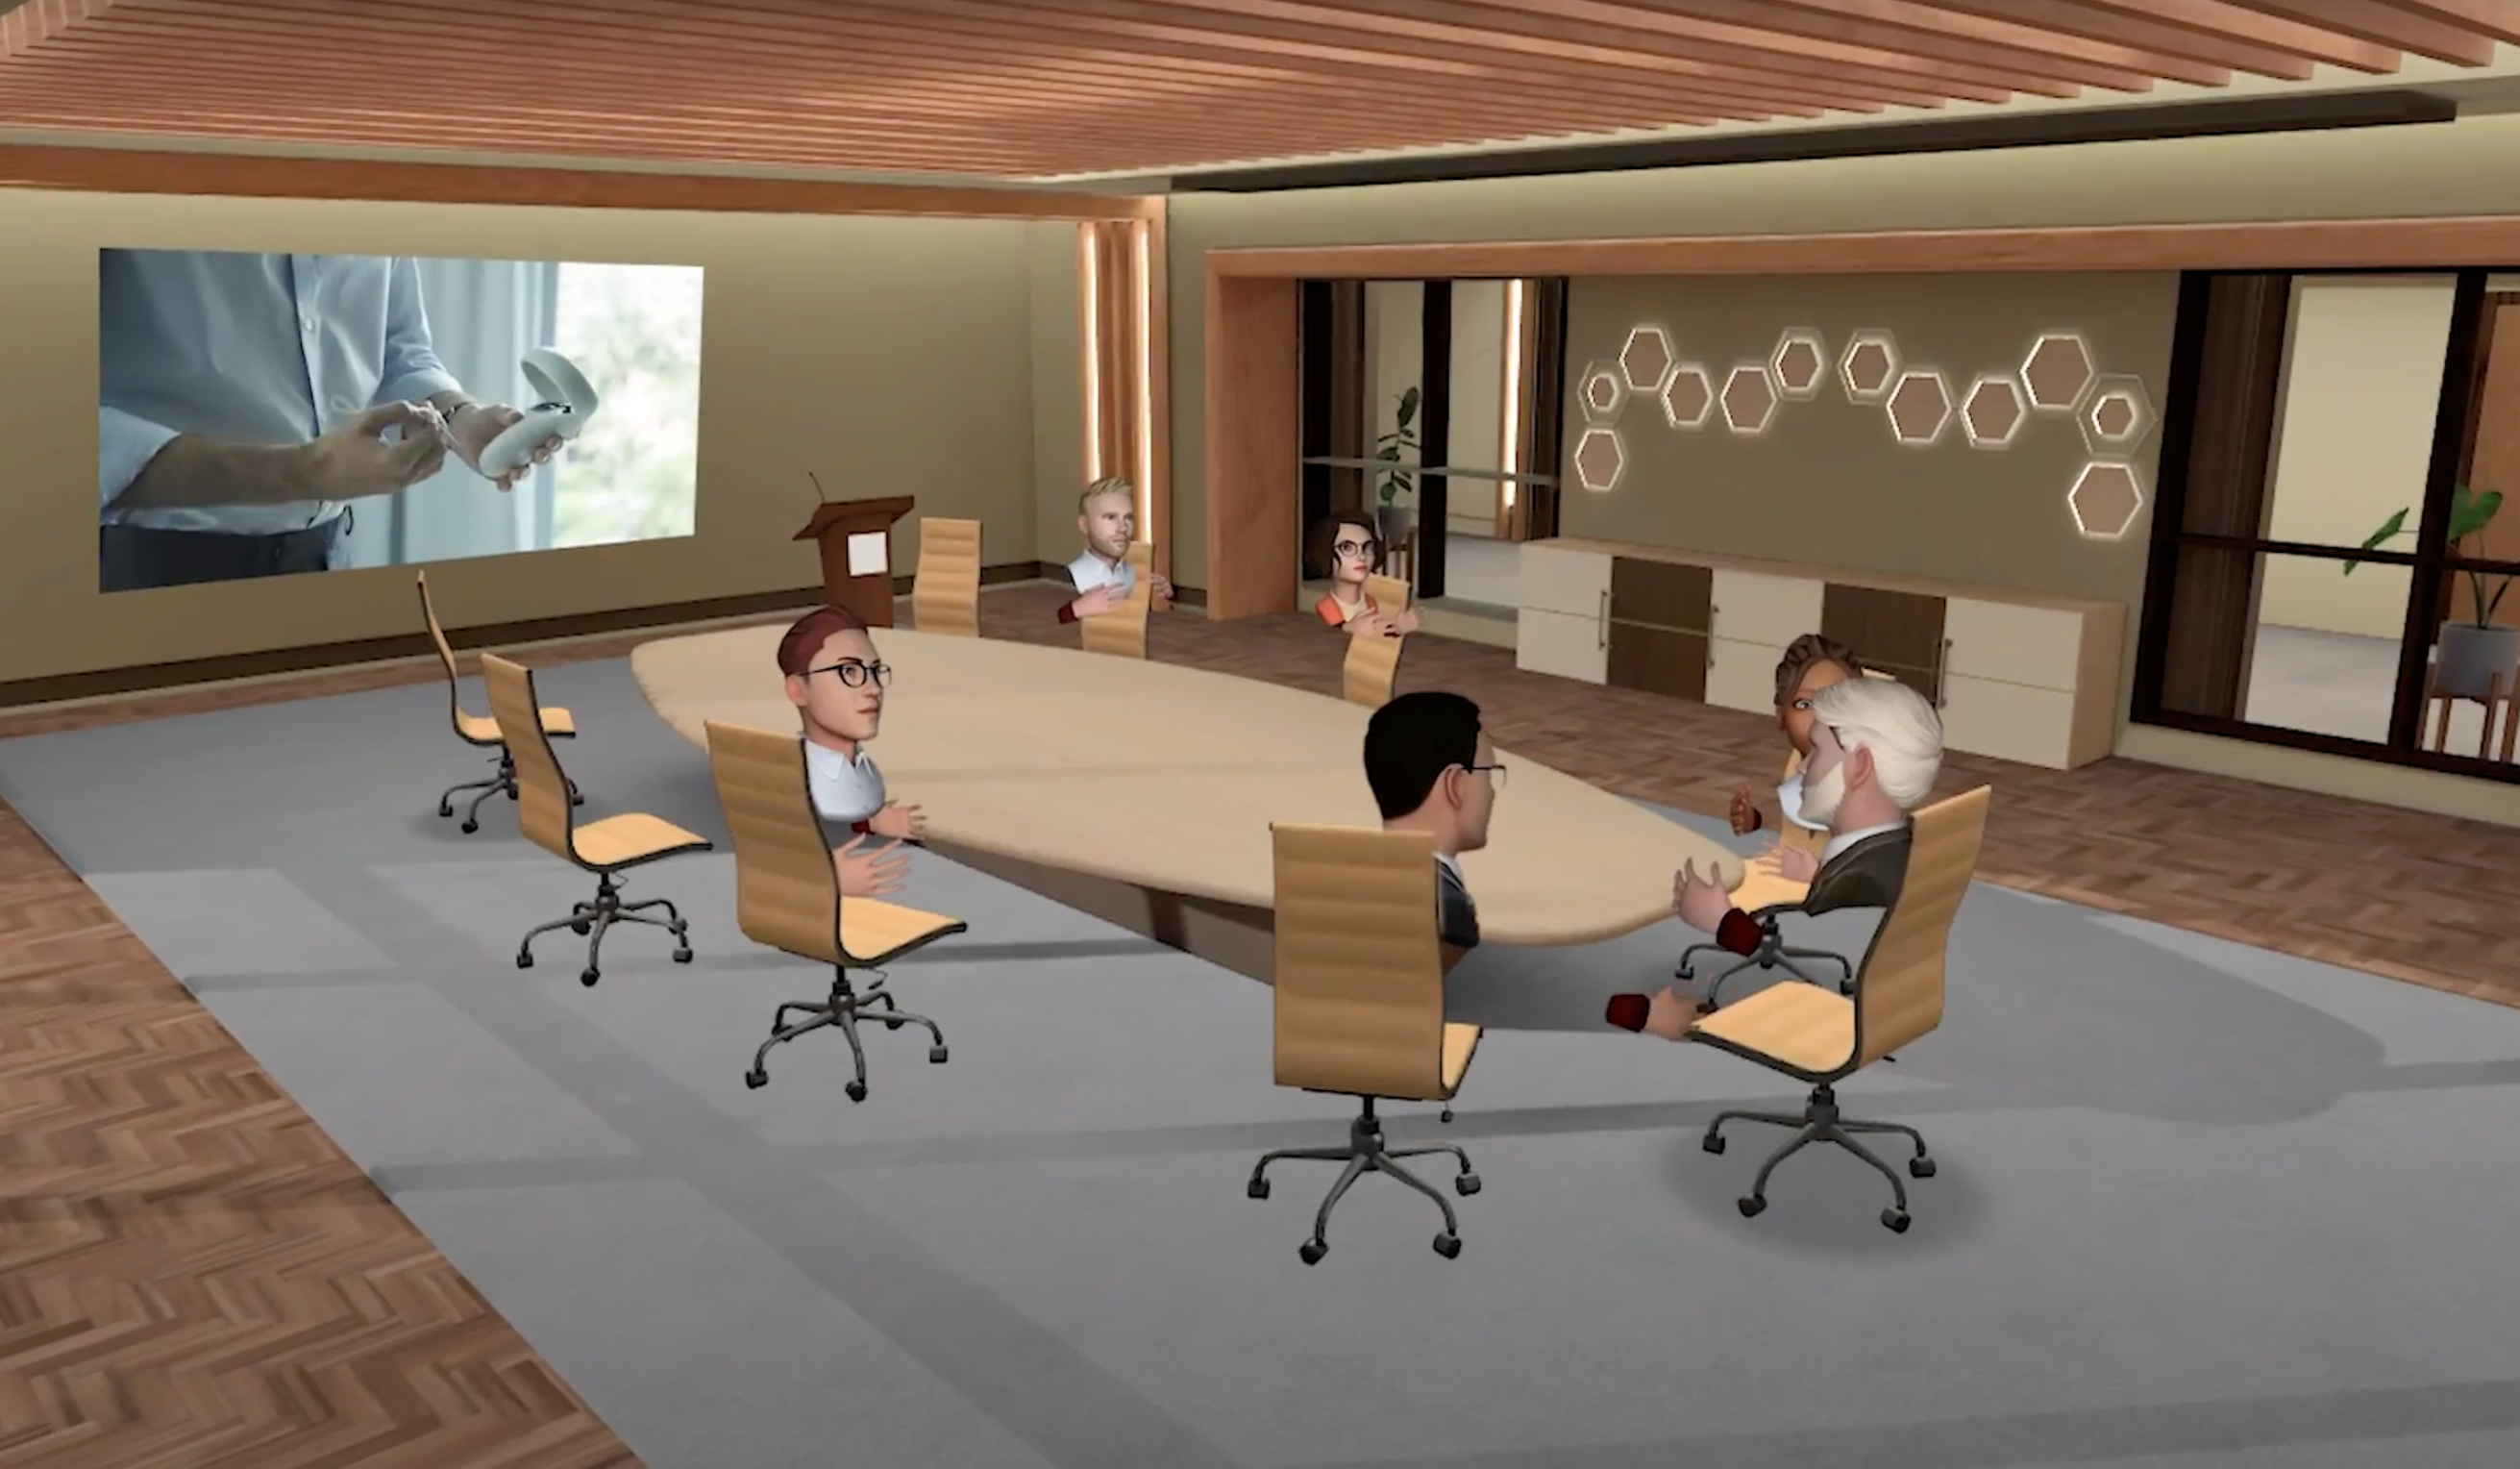 Foretell Reality Board Room Environment